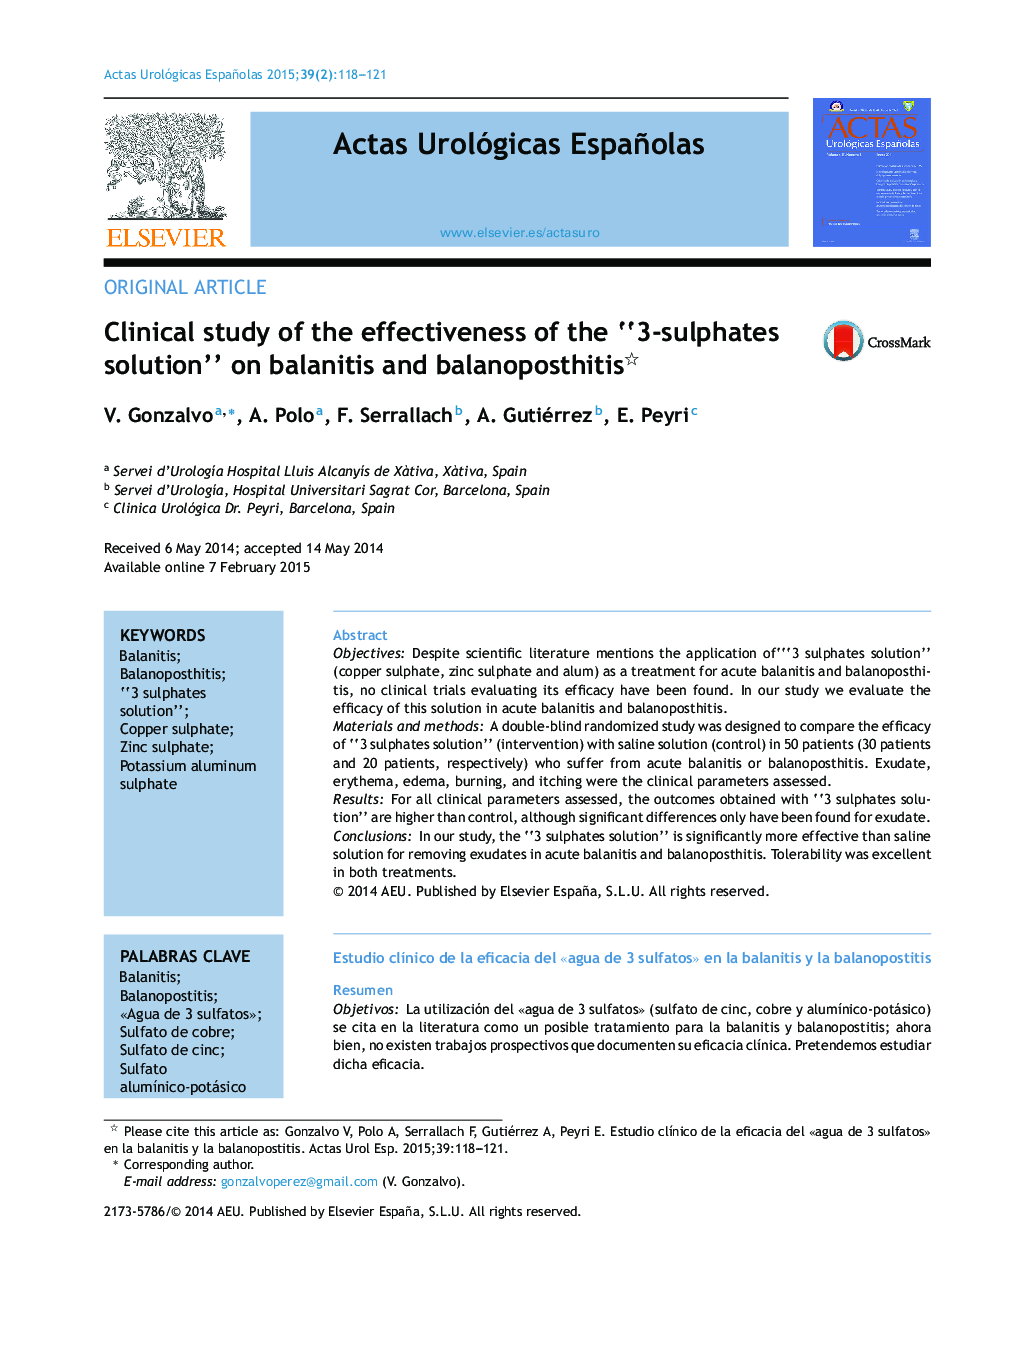 Clinical study of the effectiveness of the “3-sulphates solution” on balanitis and balanoposthitis 